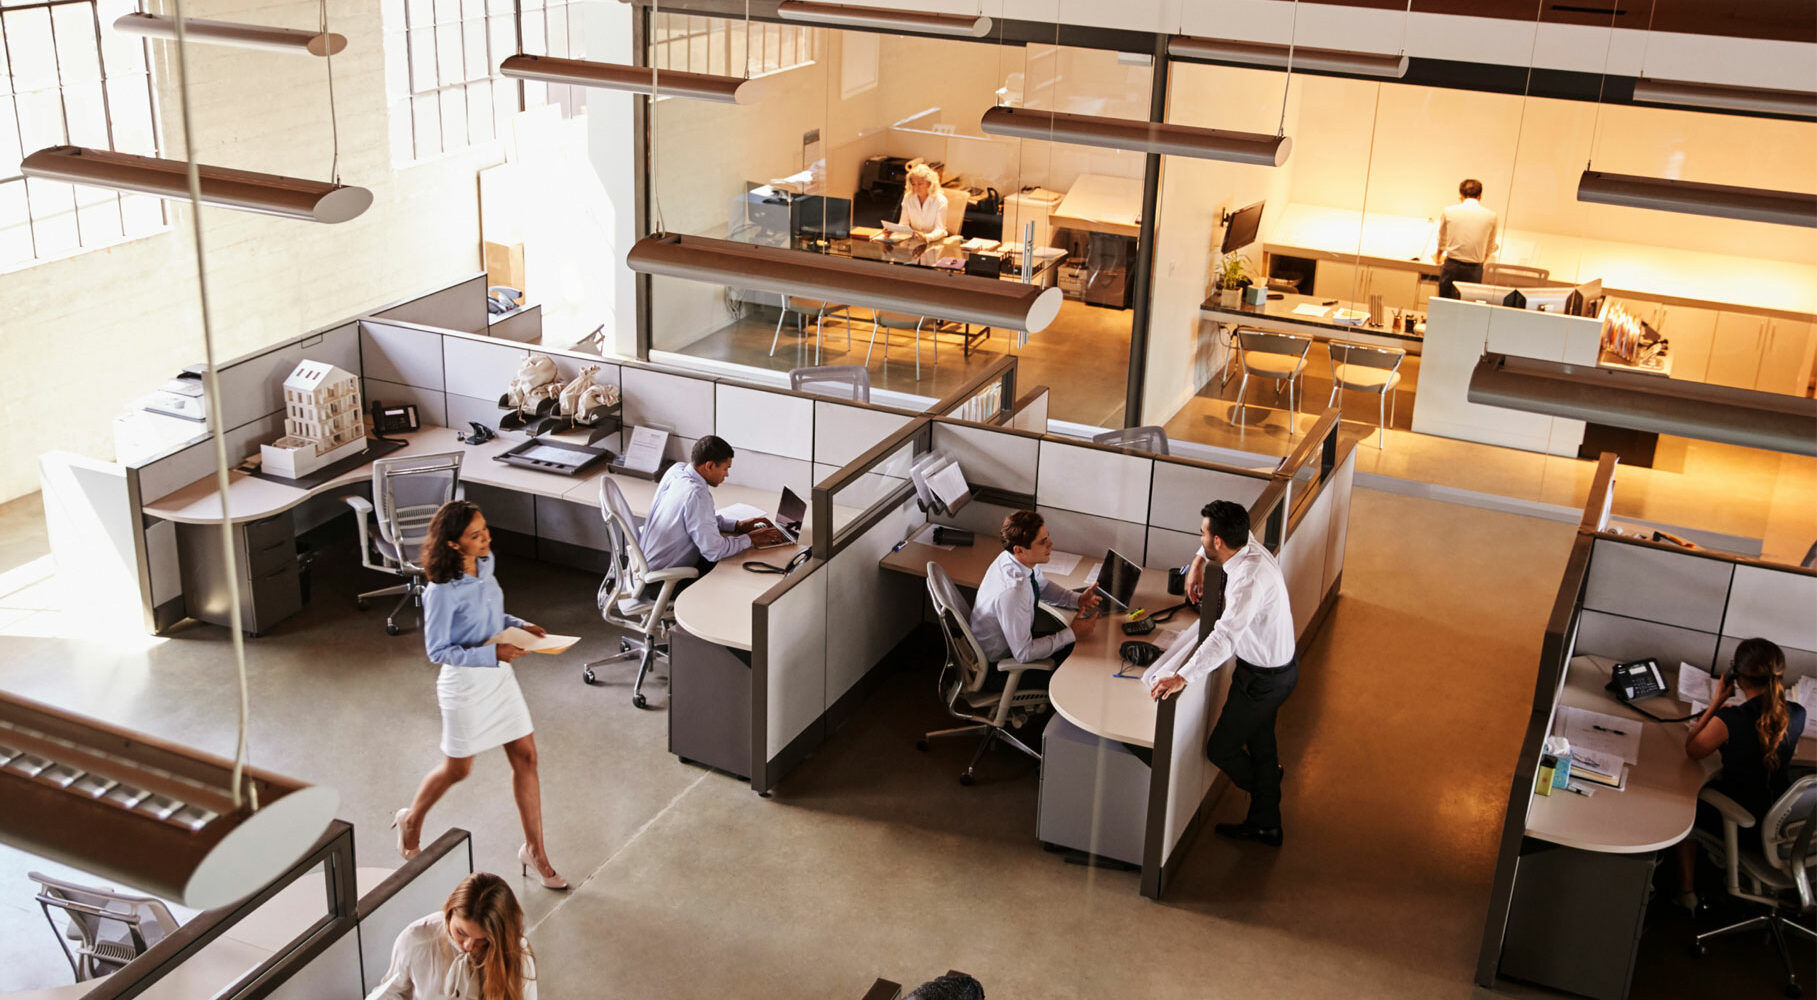 Rightsizing your office spaces - 3 tips to reducing costs and improving employee productivity